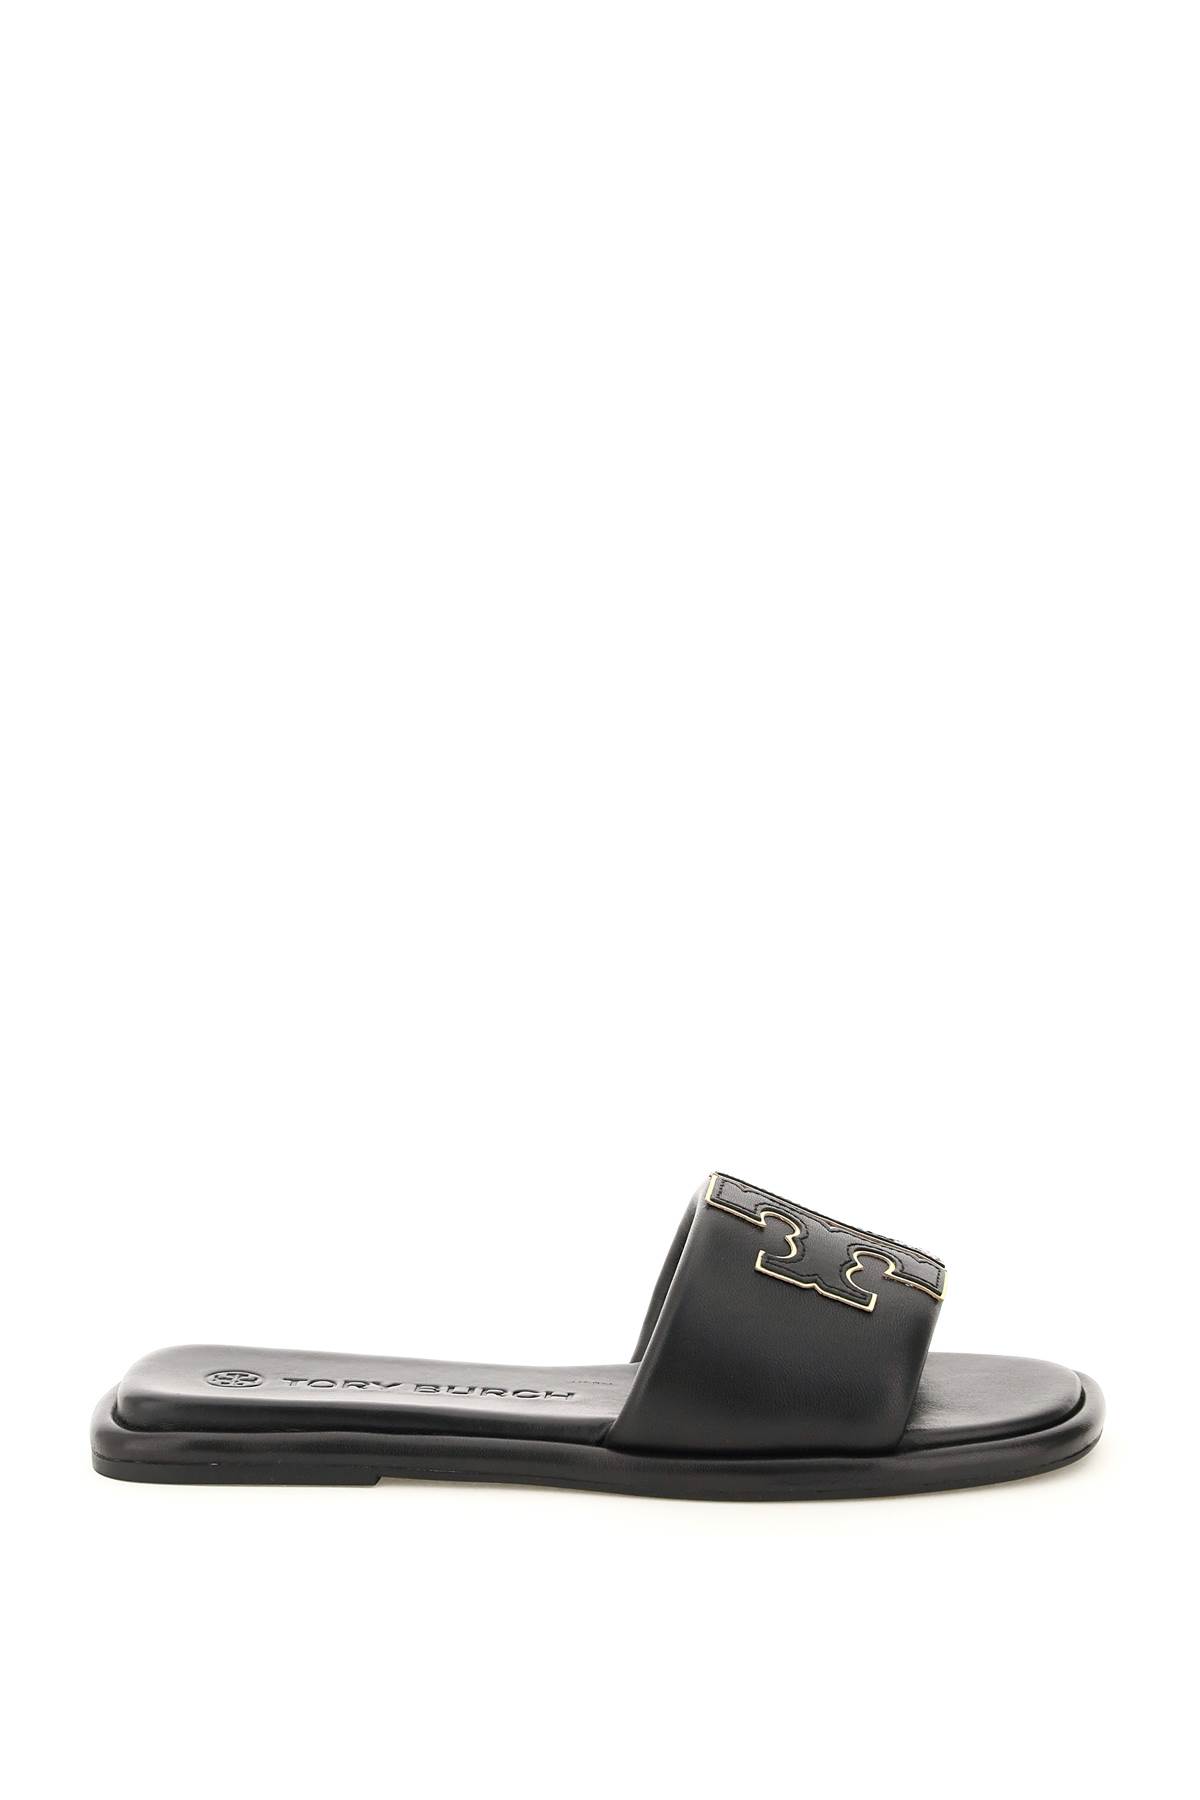 Tory Burch Double T Leather Sliders | ModeSens